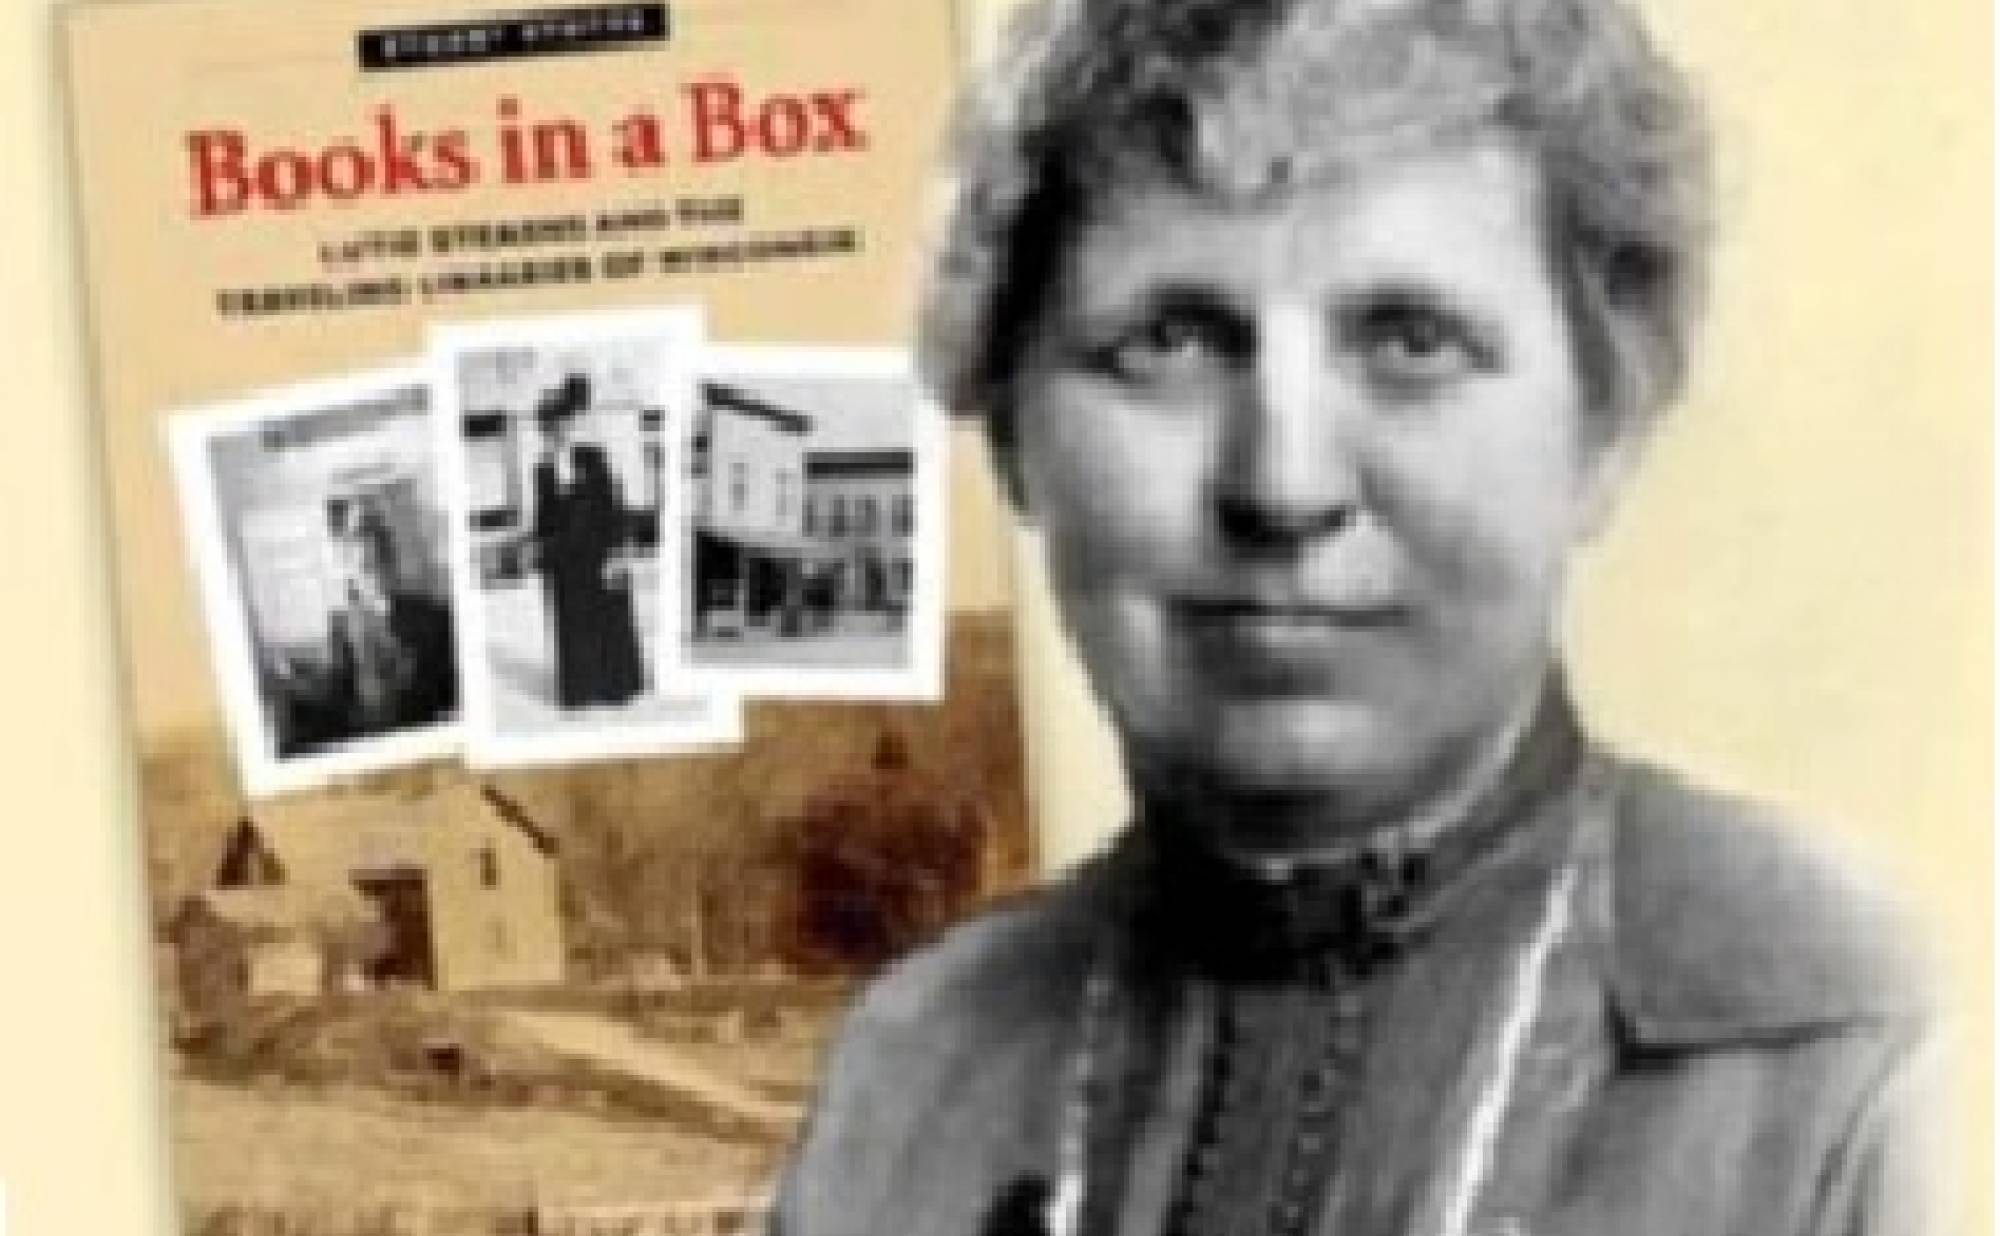 "Books in a Box: Lutie Stearns and the Traveling Libraries of Wisconsin"